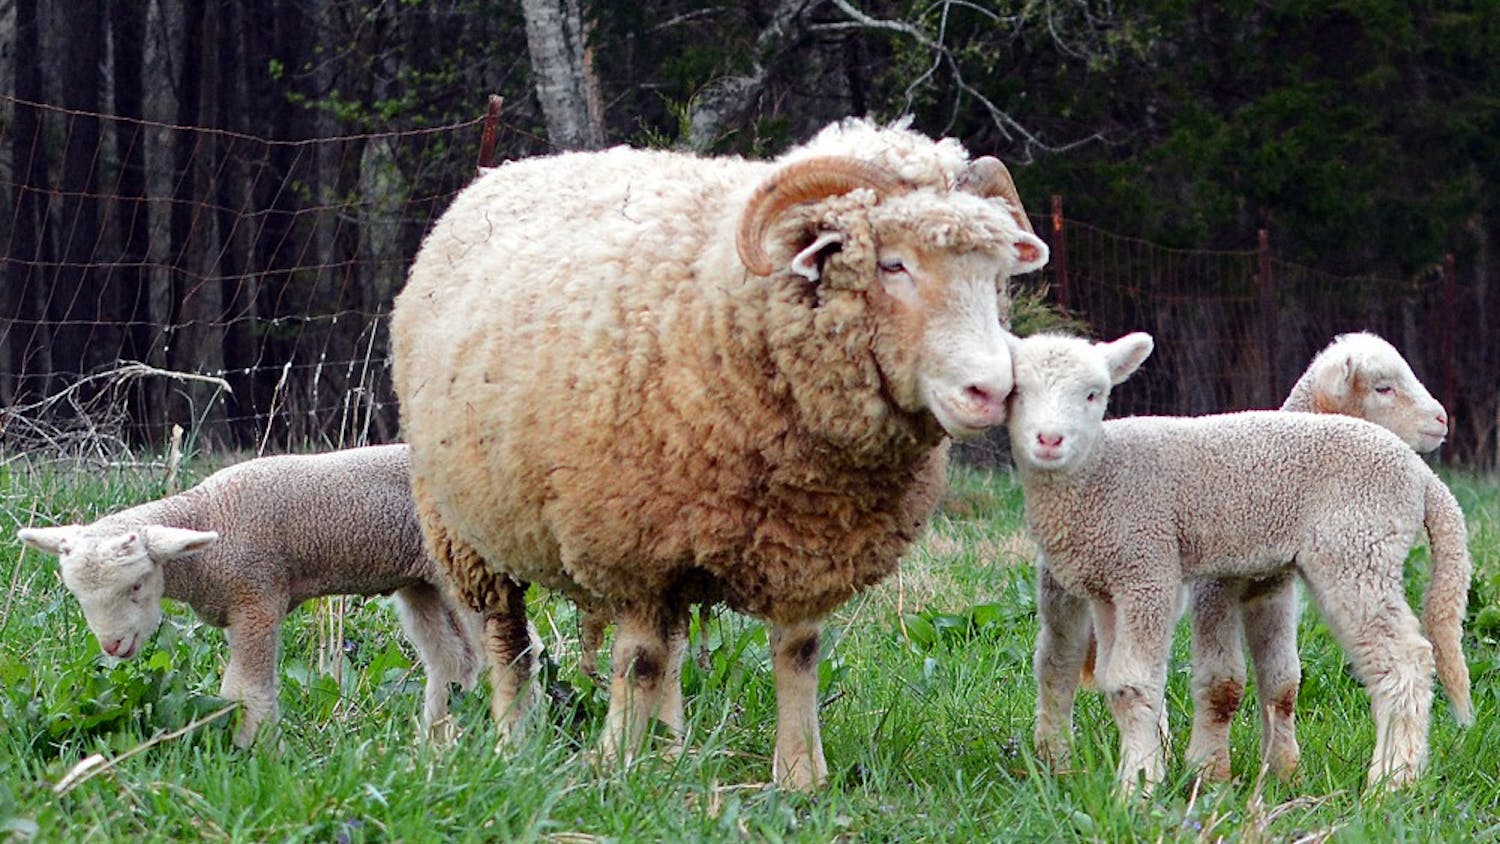 Several rams roam about at Hogan’s Magnolia View Farm on Old N.C. 86 on Tuesday evening. Rameses, UNC’s mascot, recently became the father of three baby lambs.